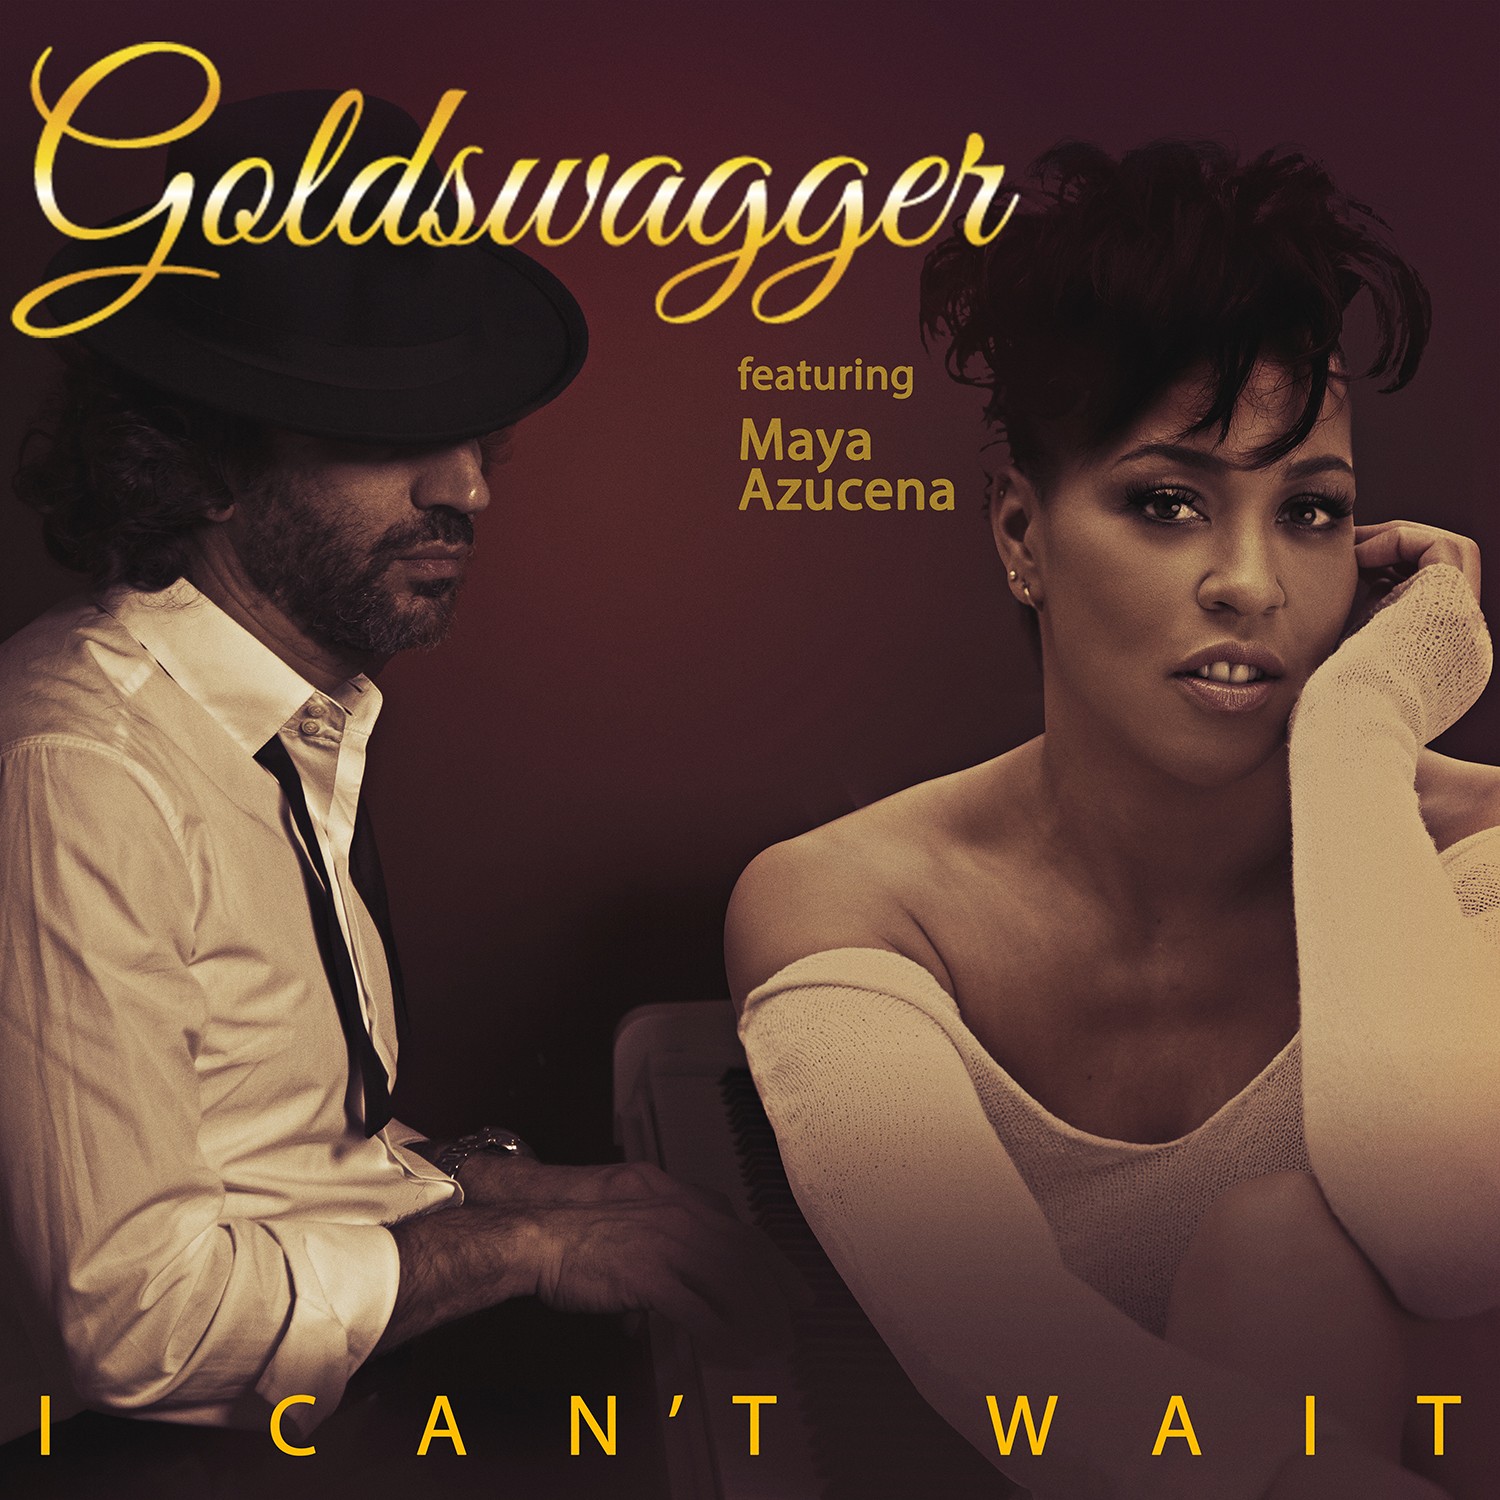 New Video: Goldswagger - I Can't Wait featuring Maya Azucena